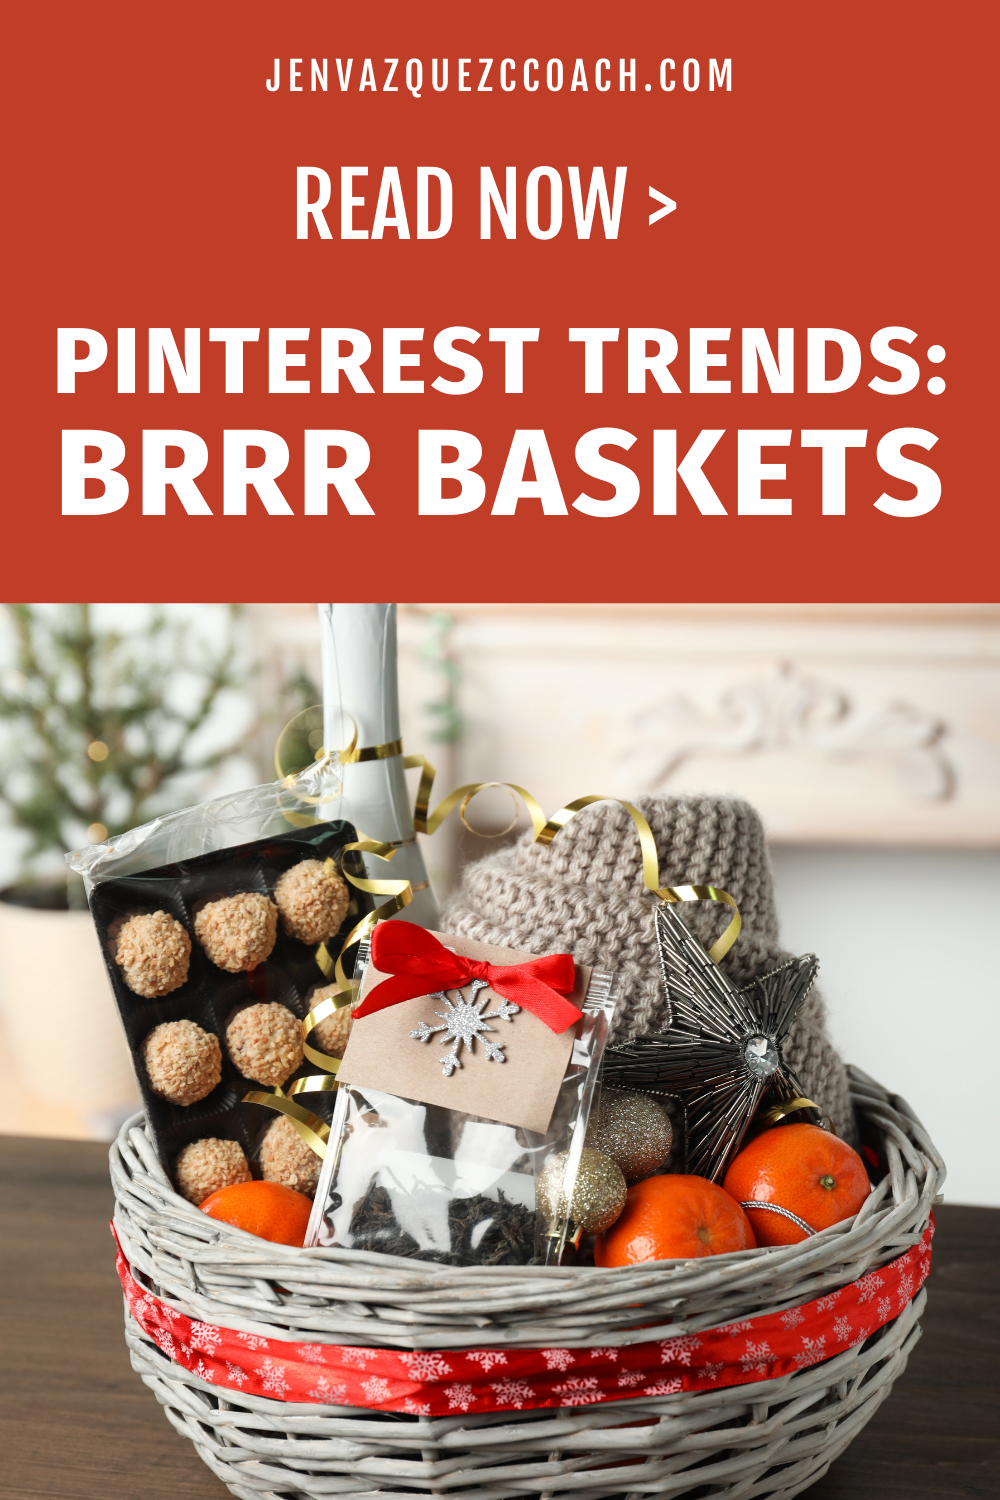 12-1-23 Pinterest Trends: Home For The Holidays Pinterest Pin by Jen Vazquez Media